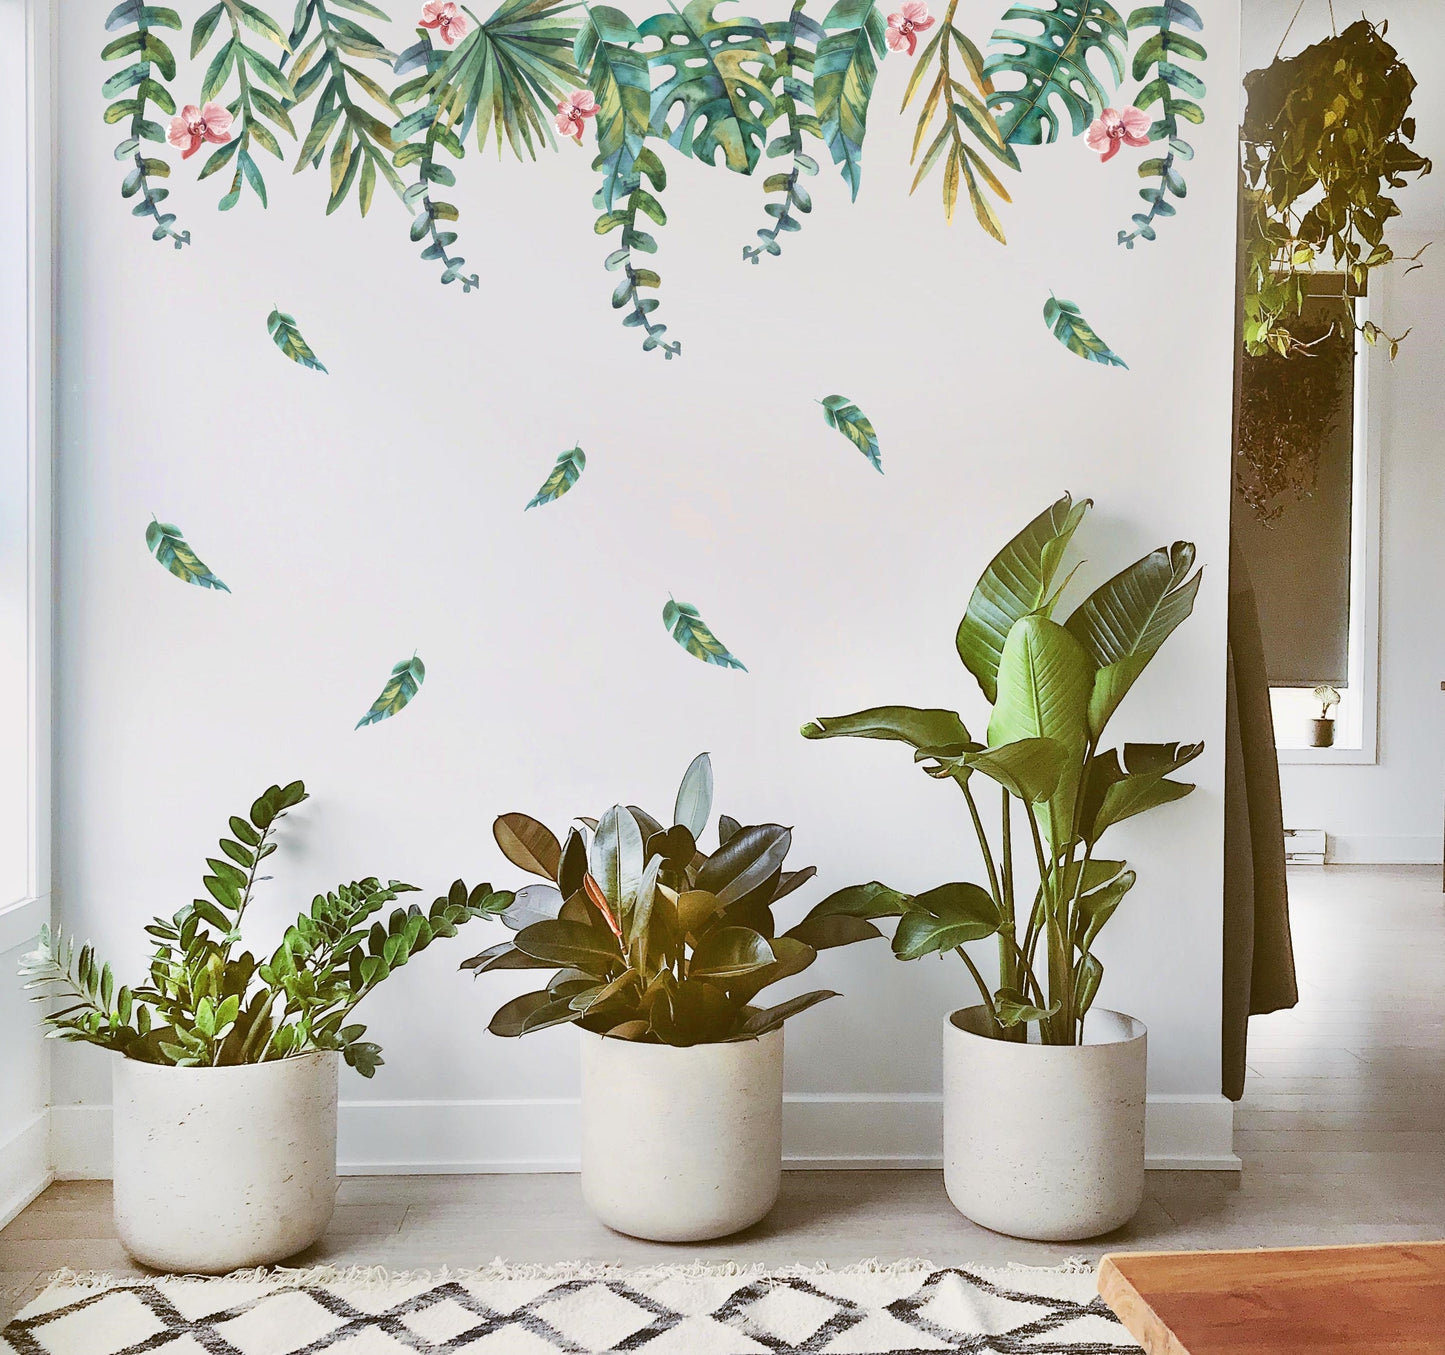 Greenery exotic Wall Decals Tropical plants orchids flowers stickers, KL0080